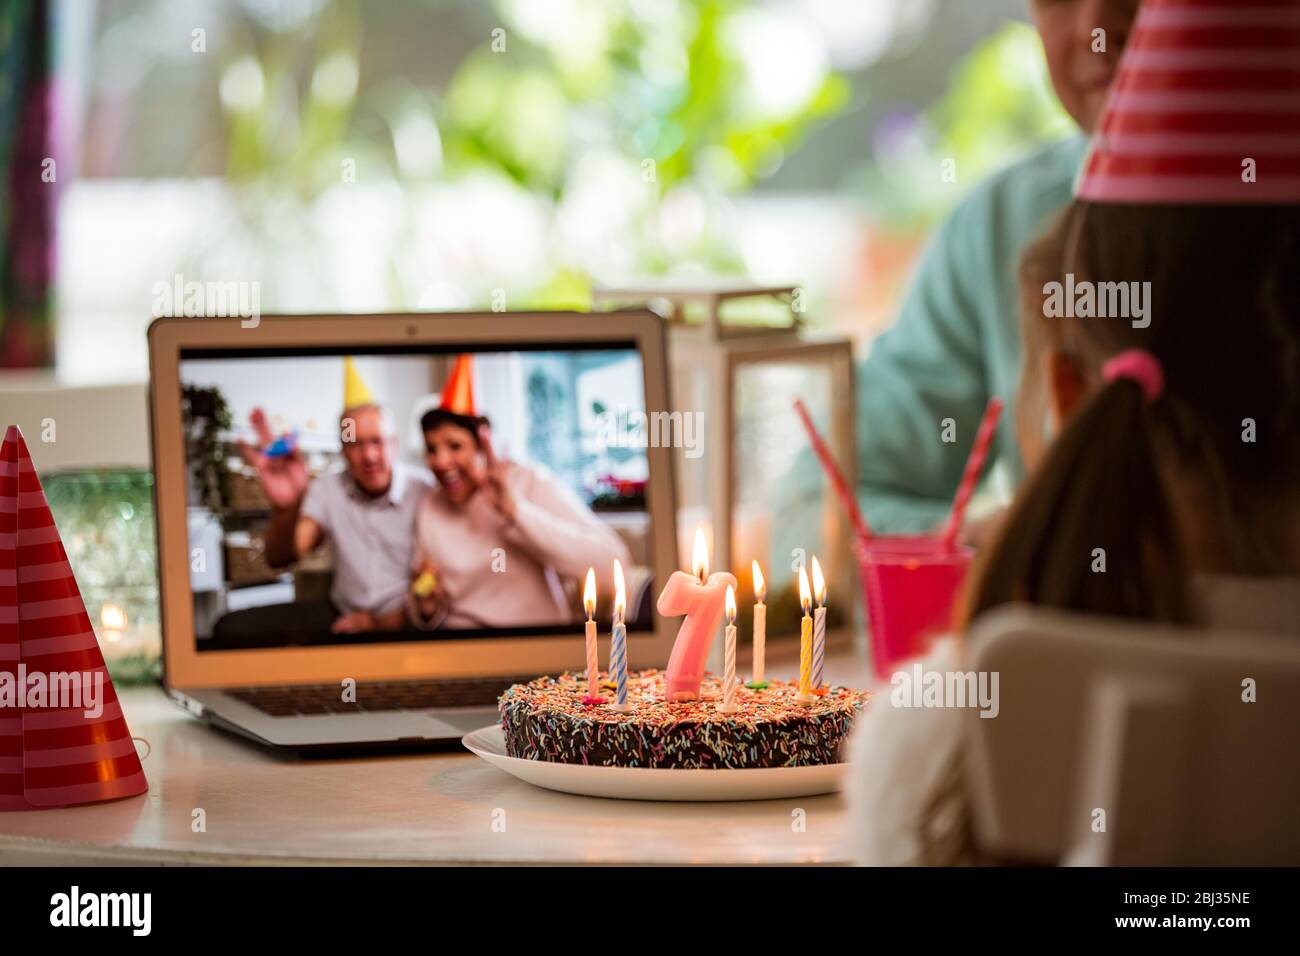 Happy little girl celebrating birthday at home with parents and grand parents on video call. Laptop with senior couple online, cake with candles Stock Photo